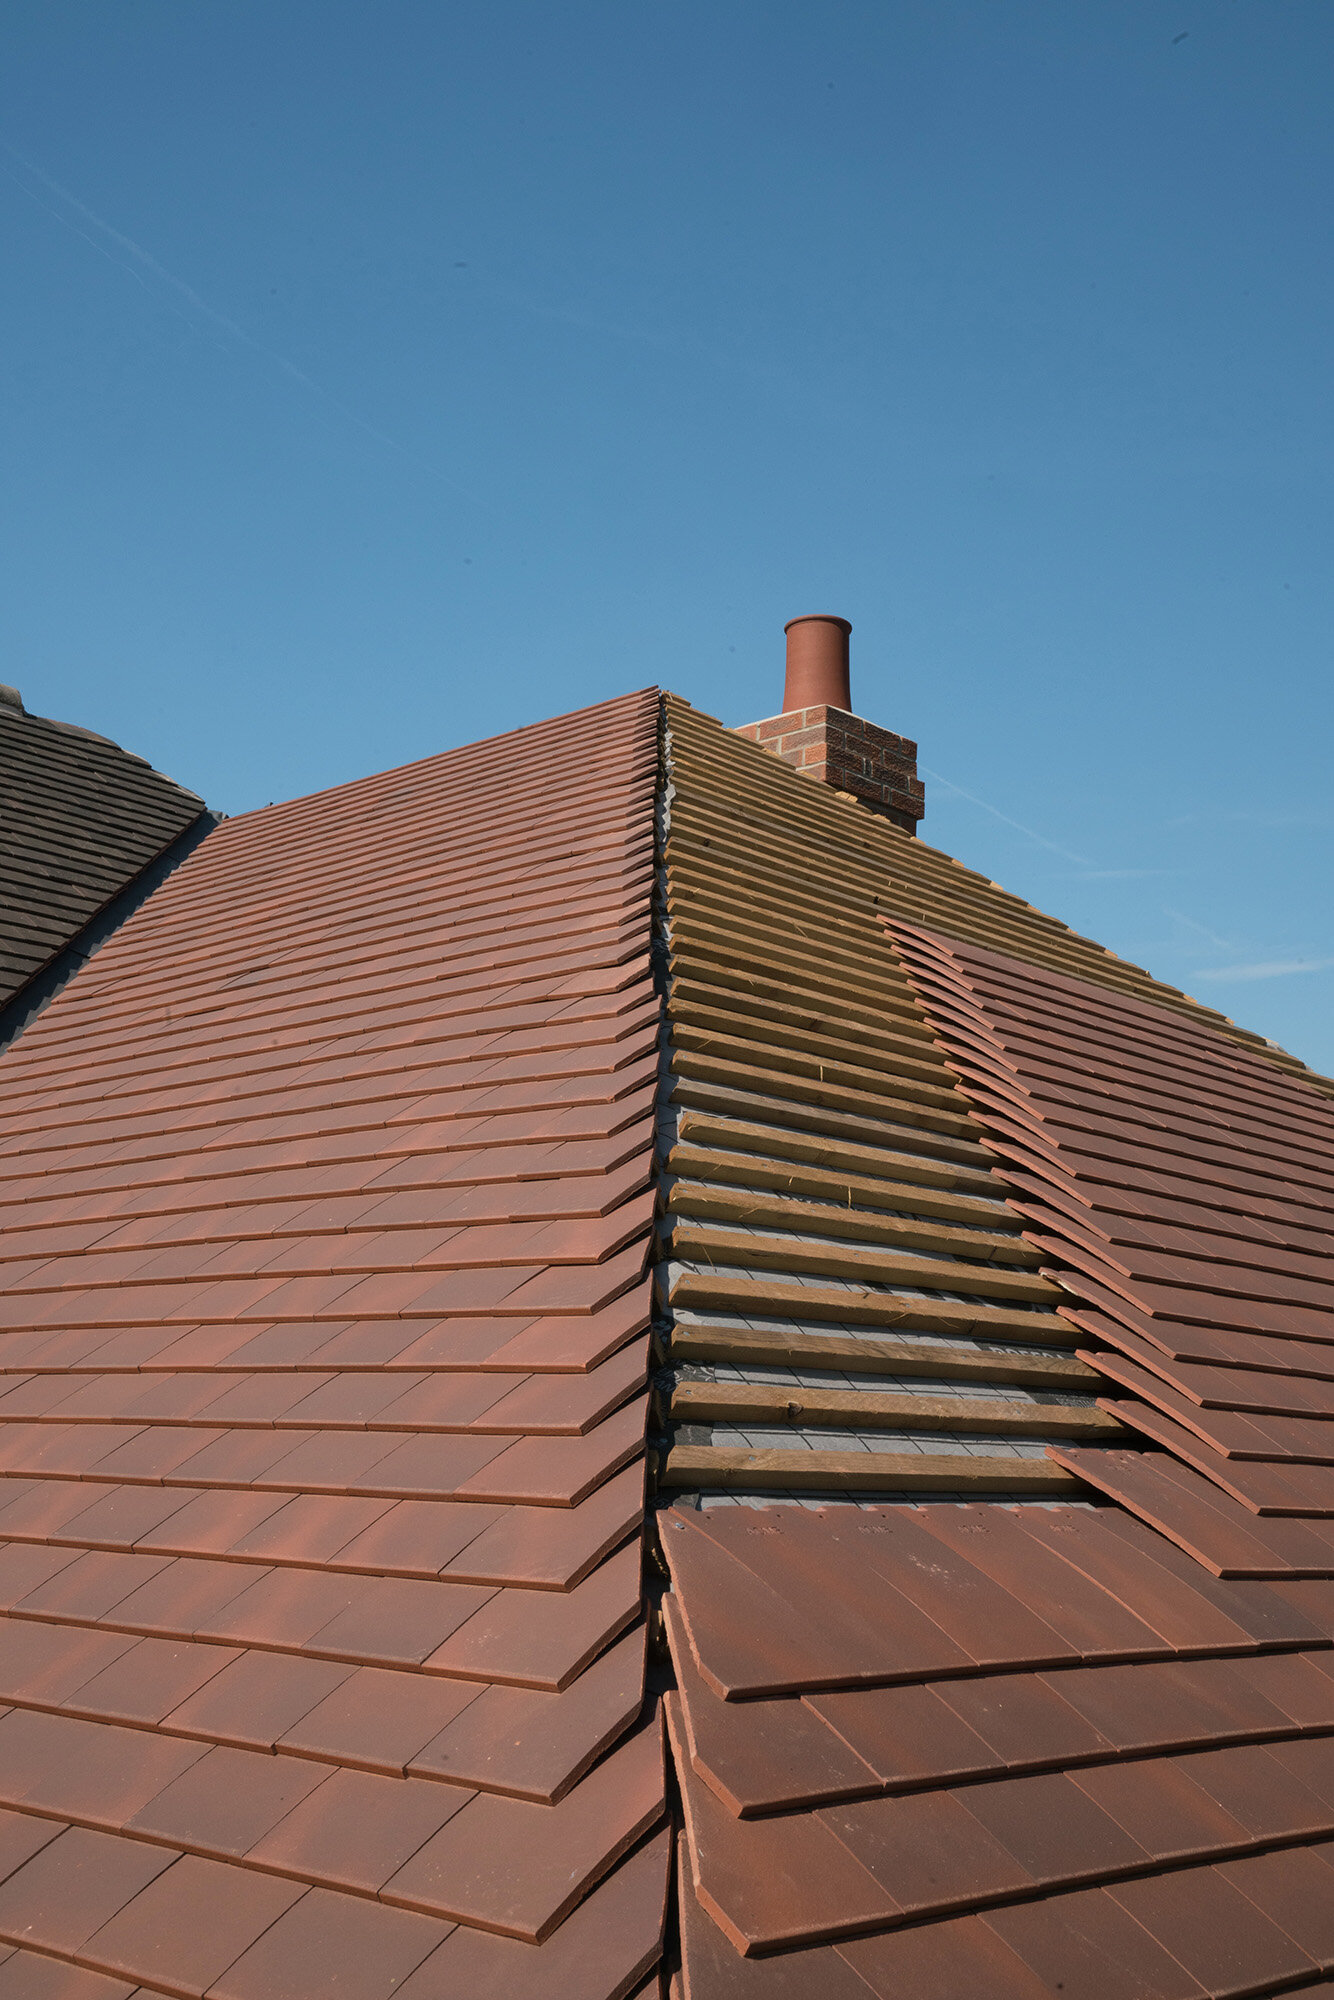 Roof Construction 3 - Rosemary House - Driffield Architects - Samuel Kendall Associates